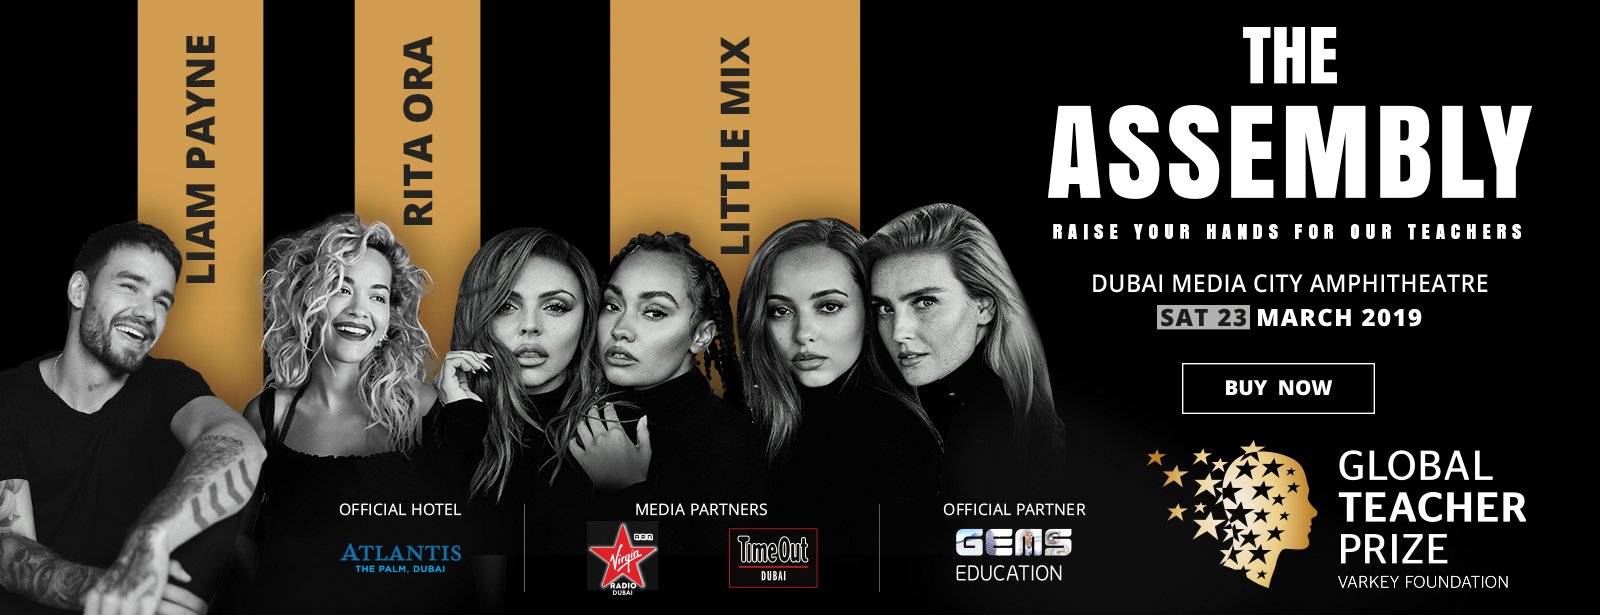 The Assembly: a Global Teacher Prize Concert ft Little Mix, Rita Ora and Liam Payne - Coming Soon in UAE